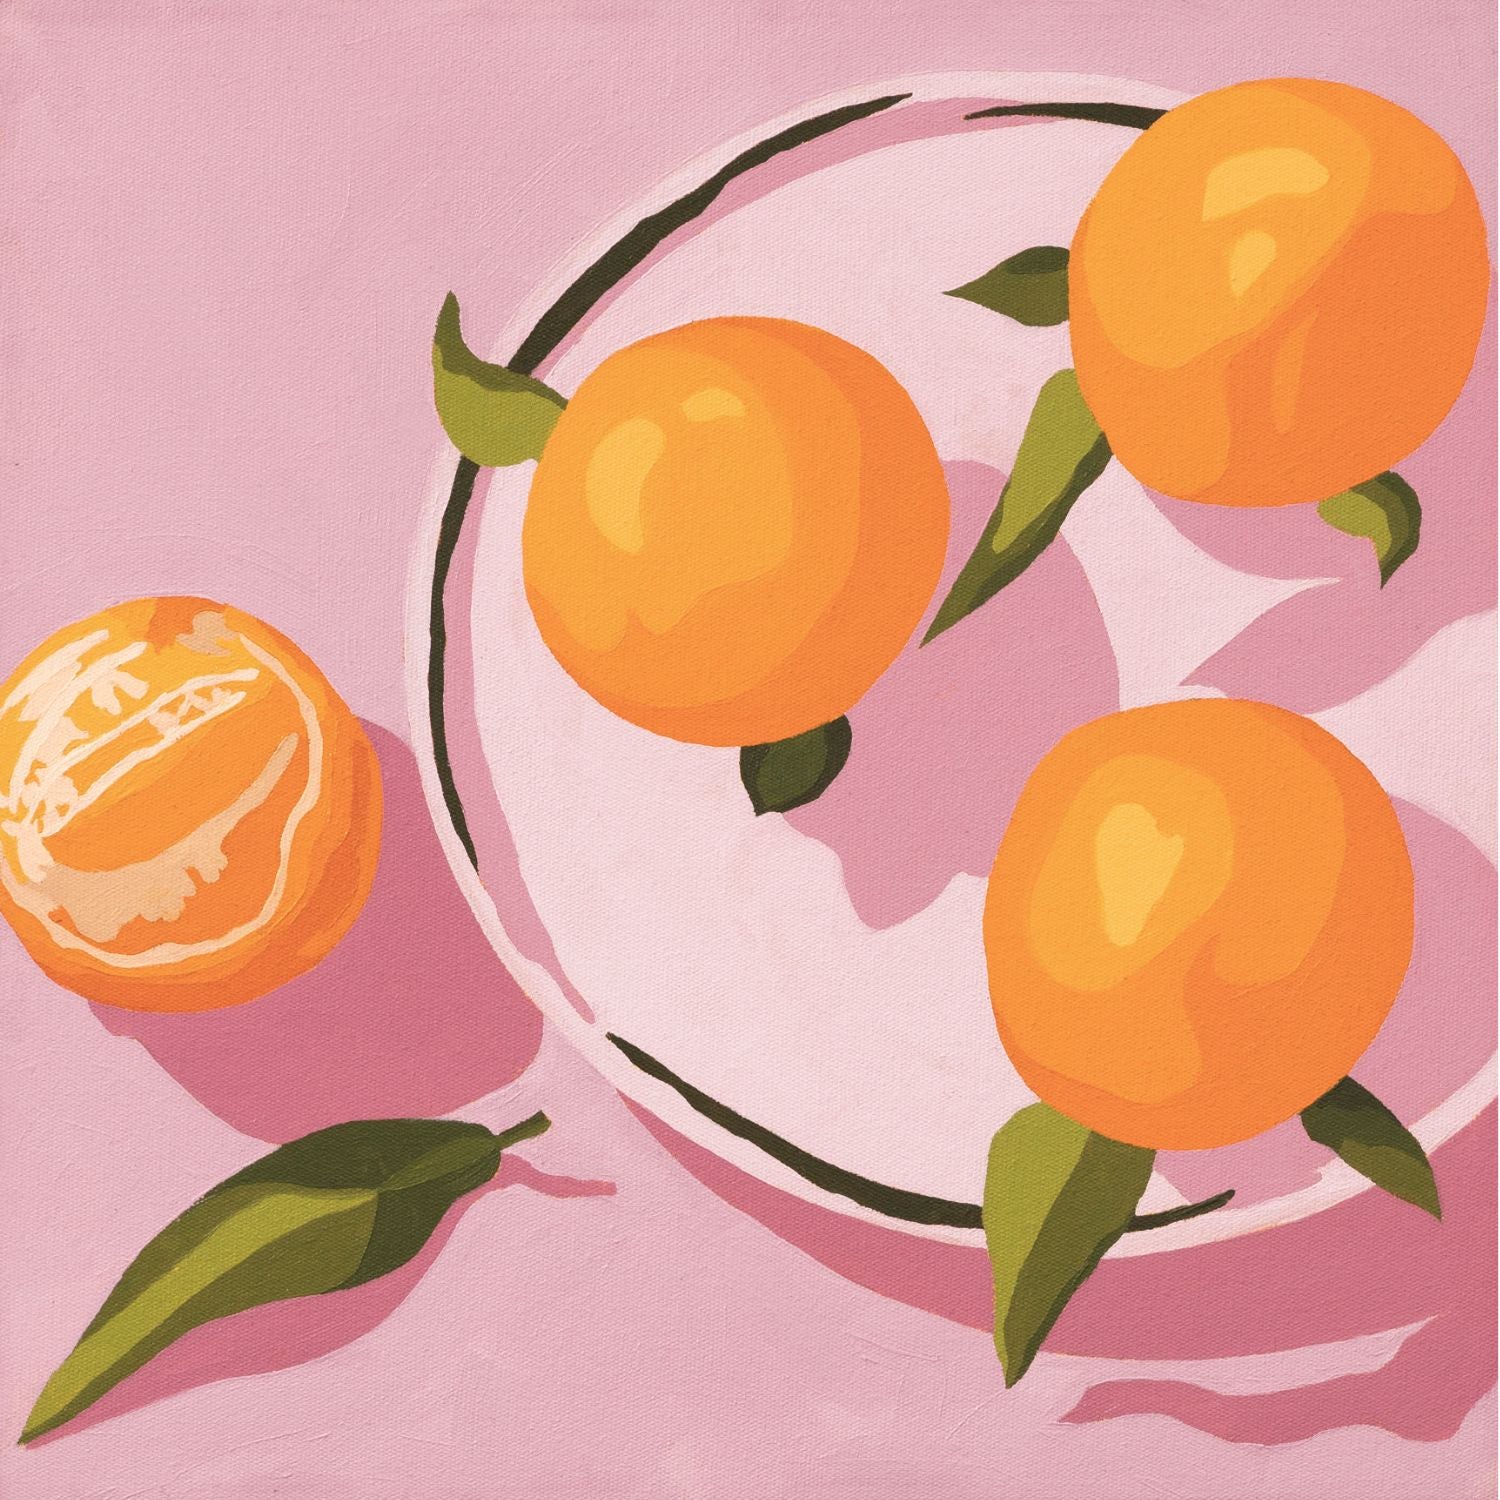 original oil painting of mandarines with green leaves on a light pinky lavender plate and background